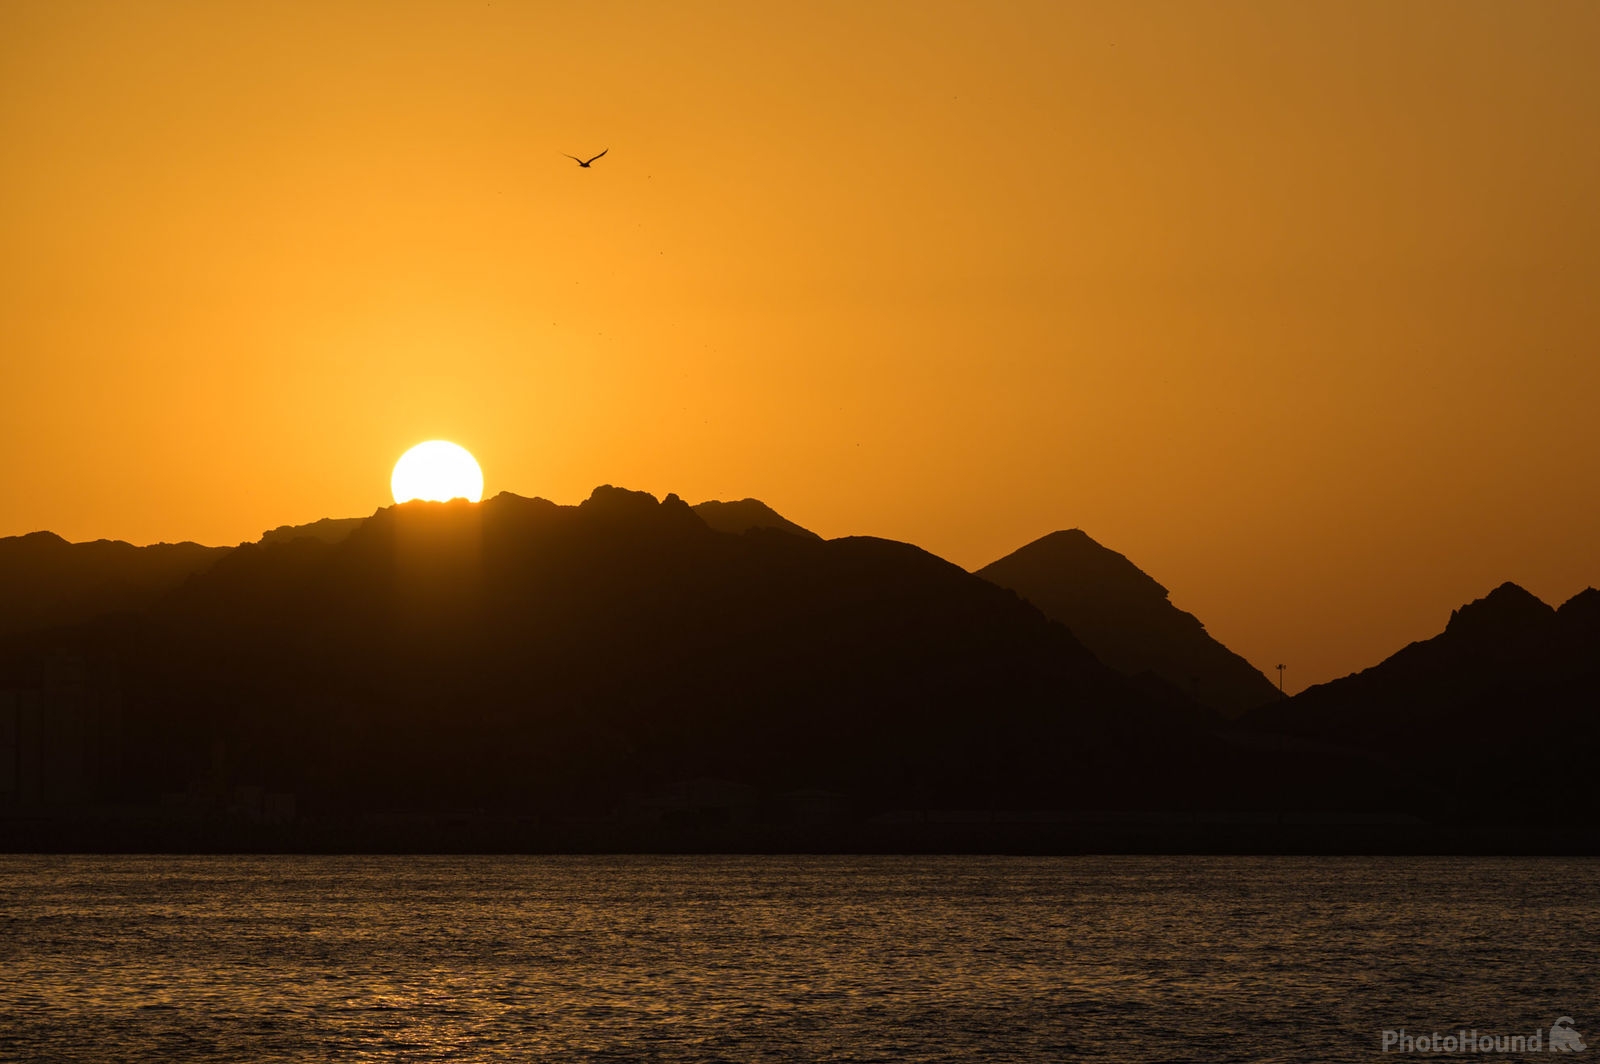 Image of Sunset Cruise in Muscat by Luka Esenko